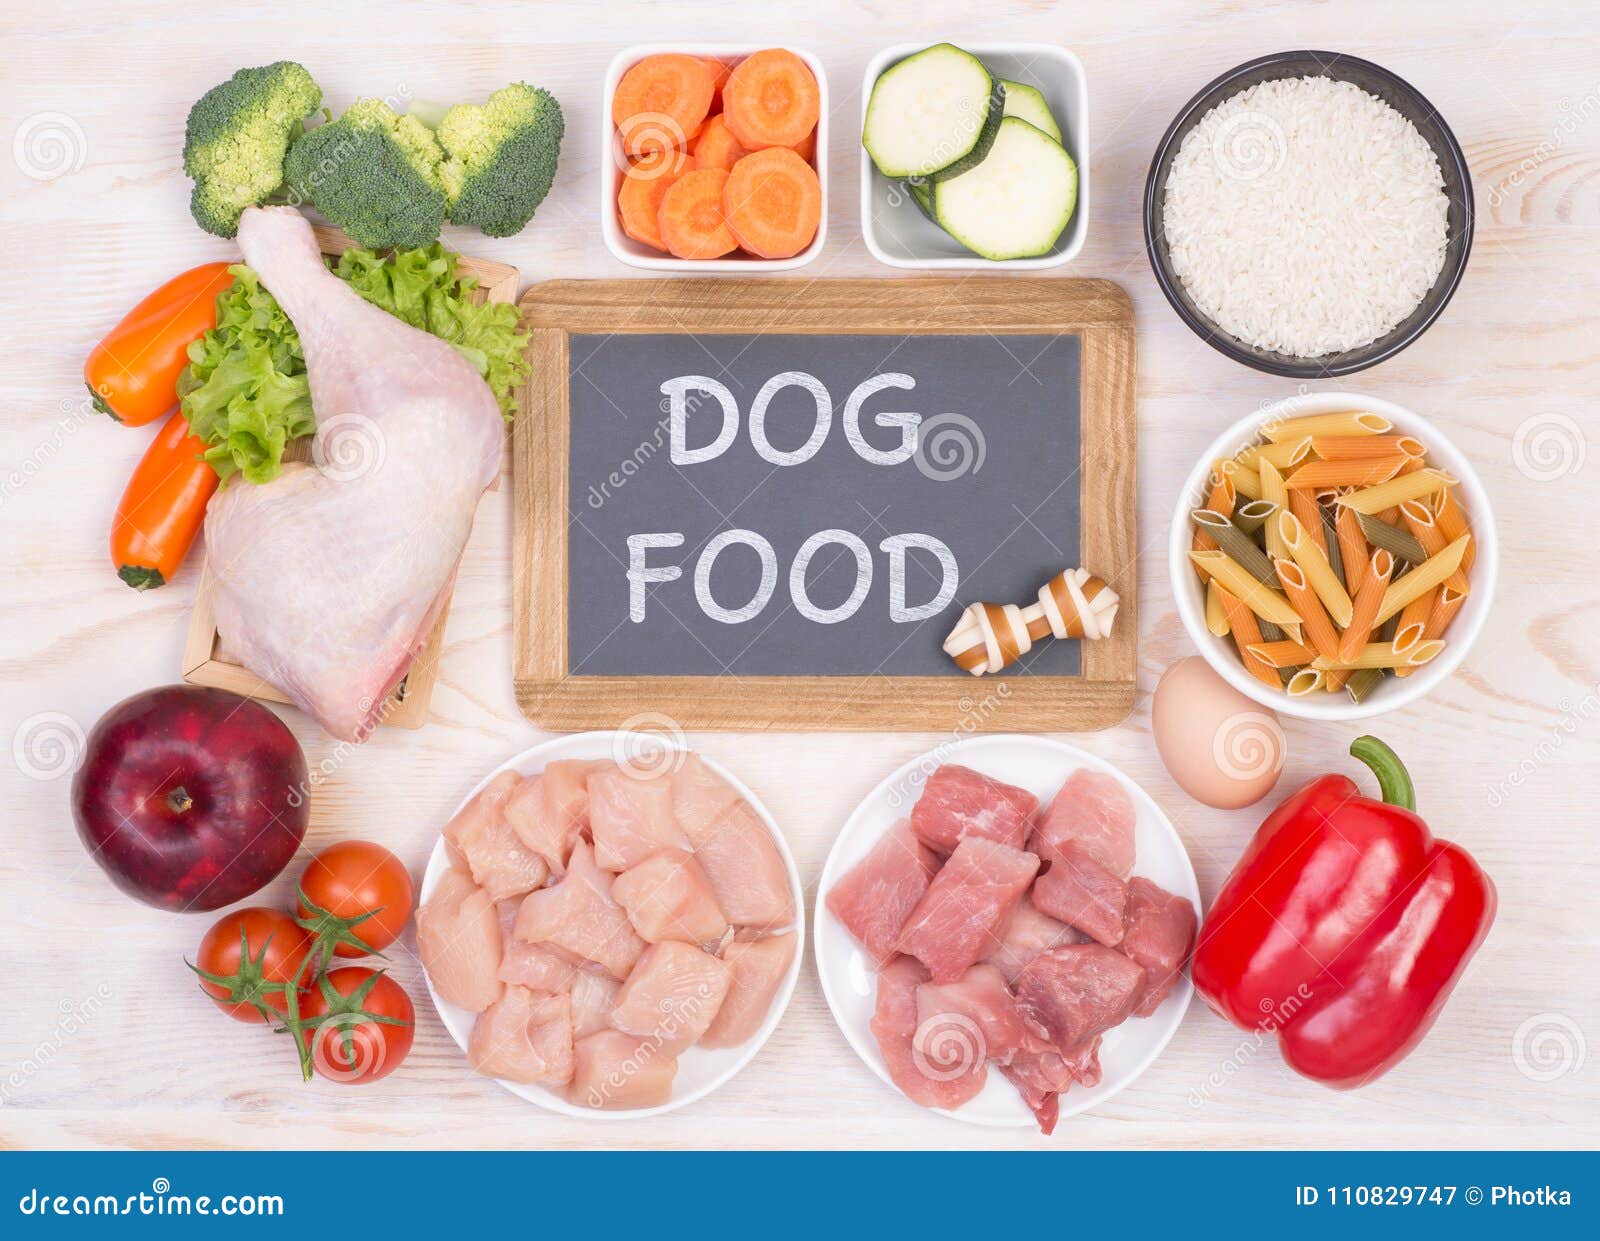 healthy meals for dogs